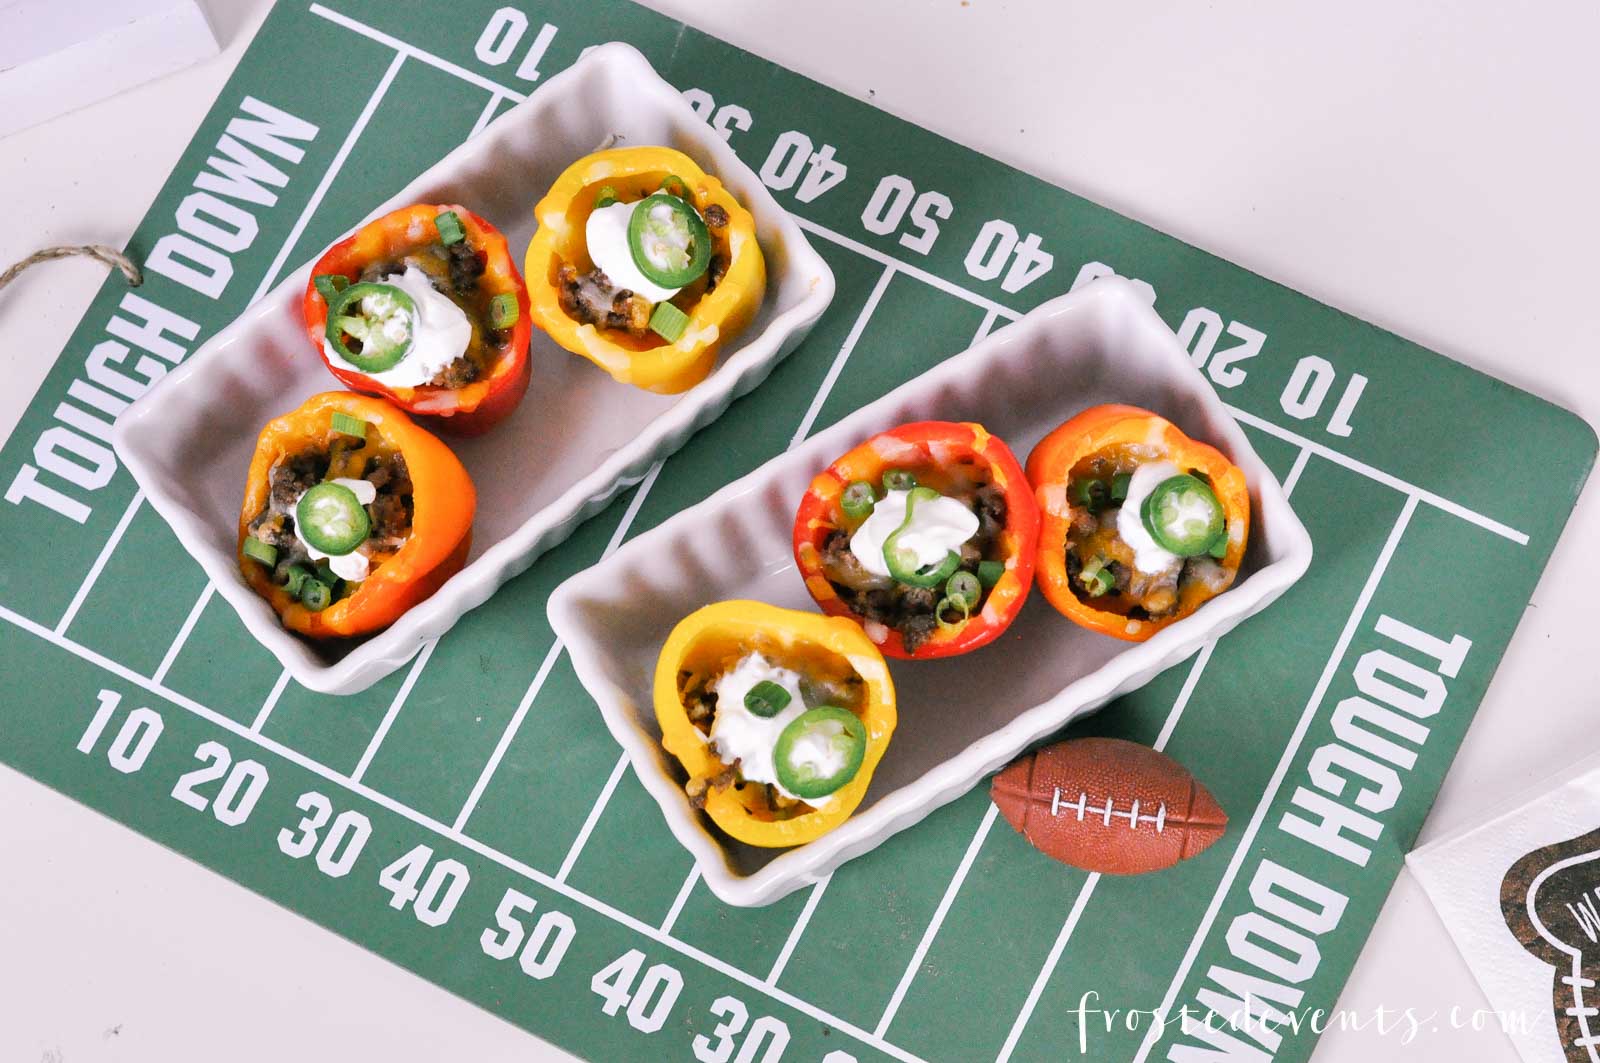 Football Food Ideas for a Winning Superbowl Party via frostedevents Snack recipes and Gameday favorites 